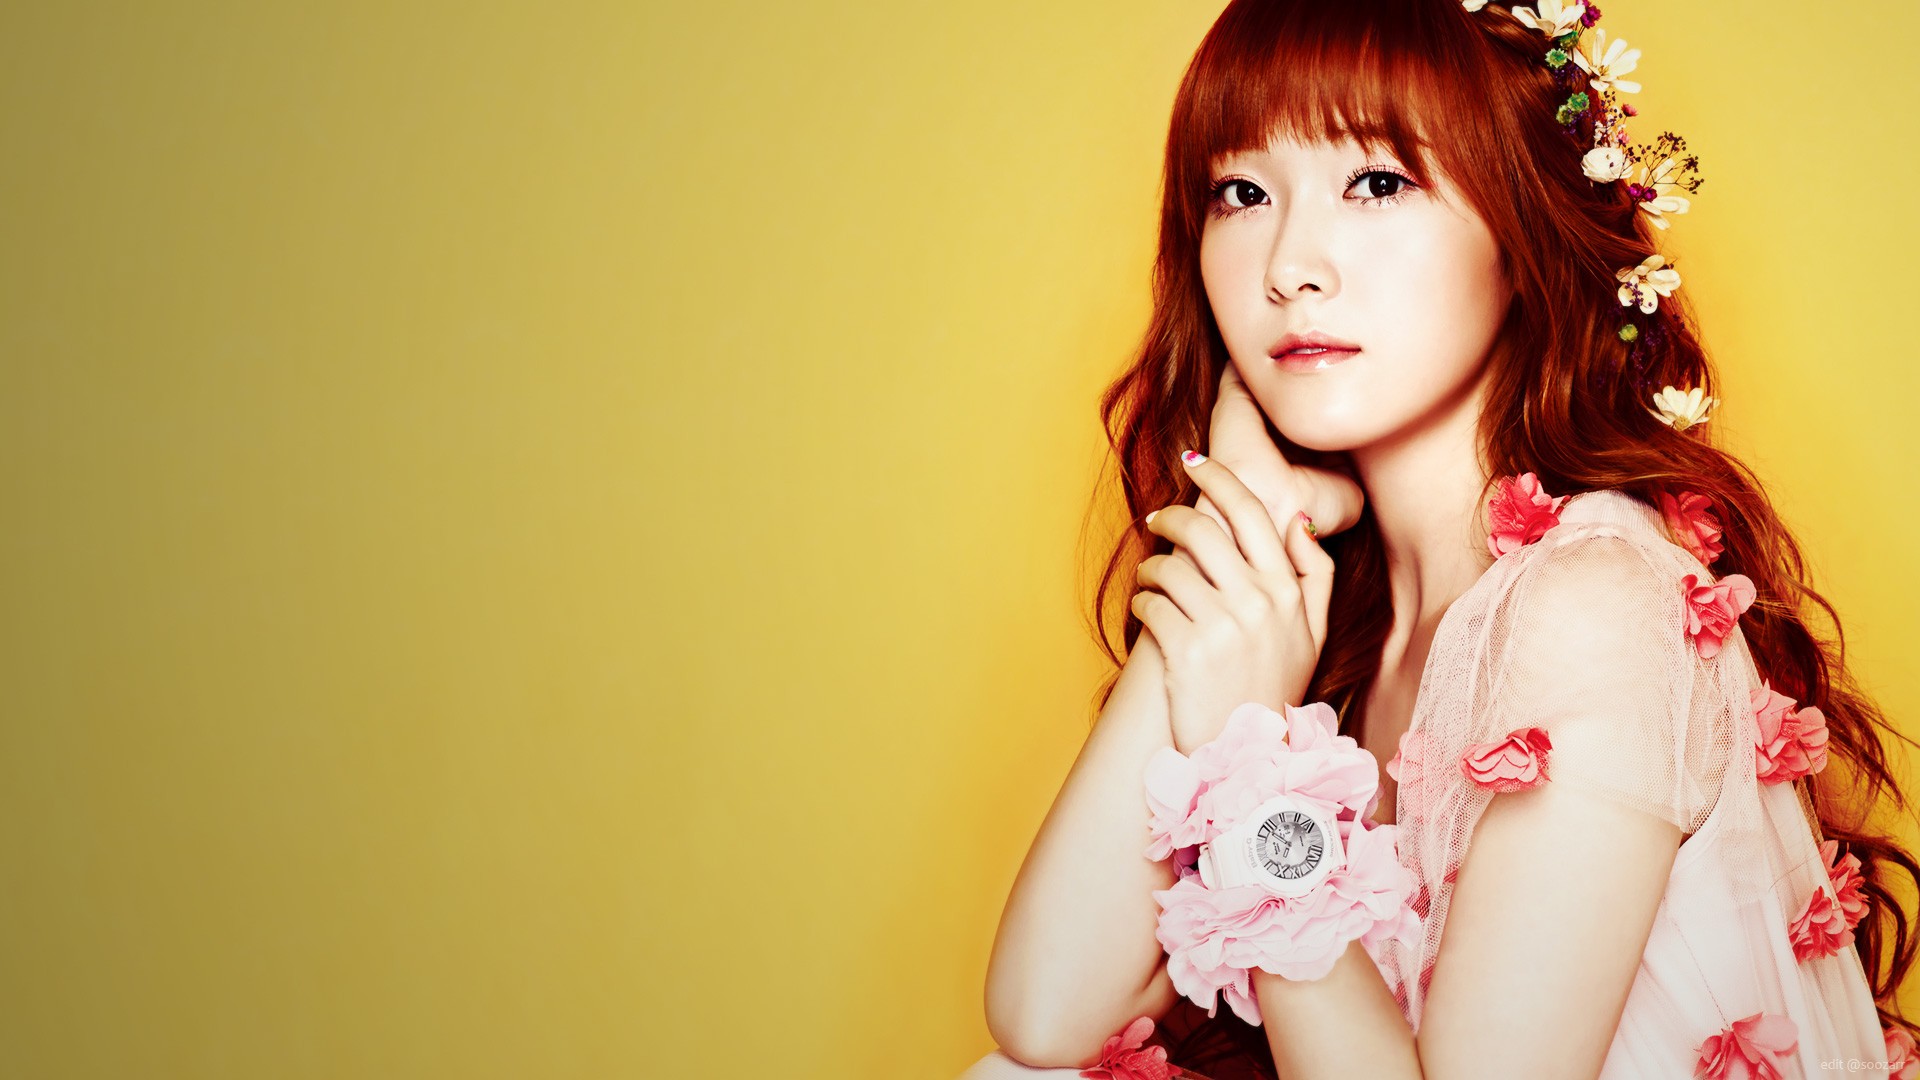 Image Snsd Jessica Jung HD Wallpaper Pc Android